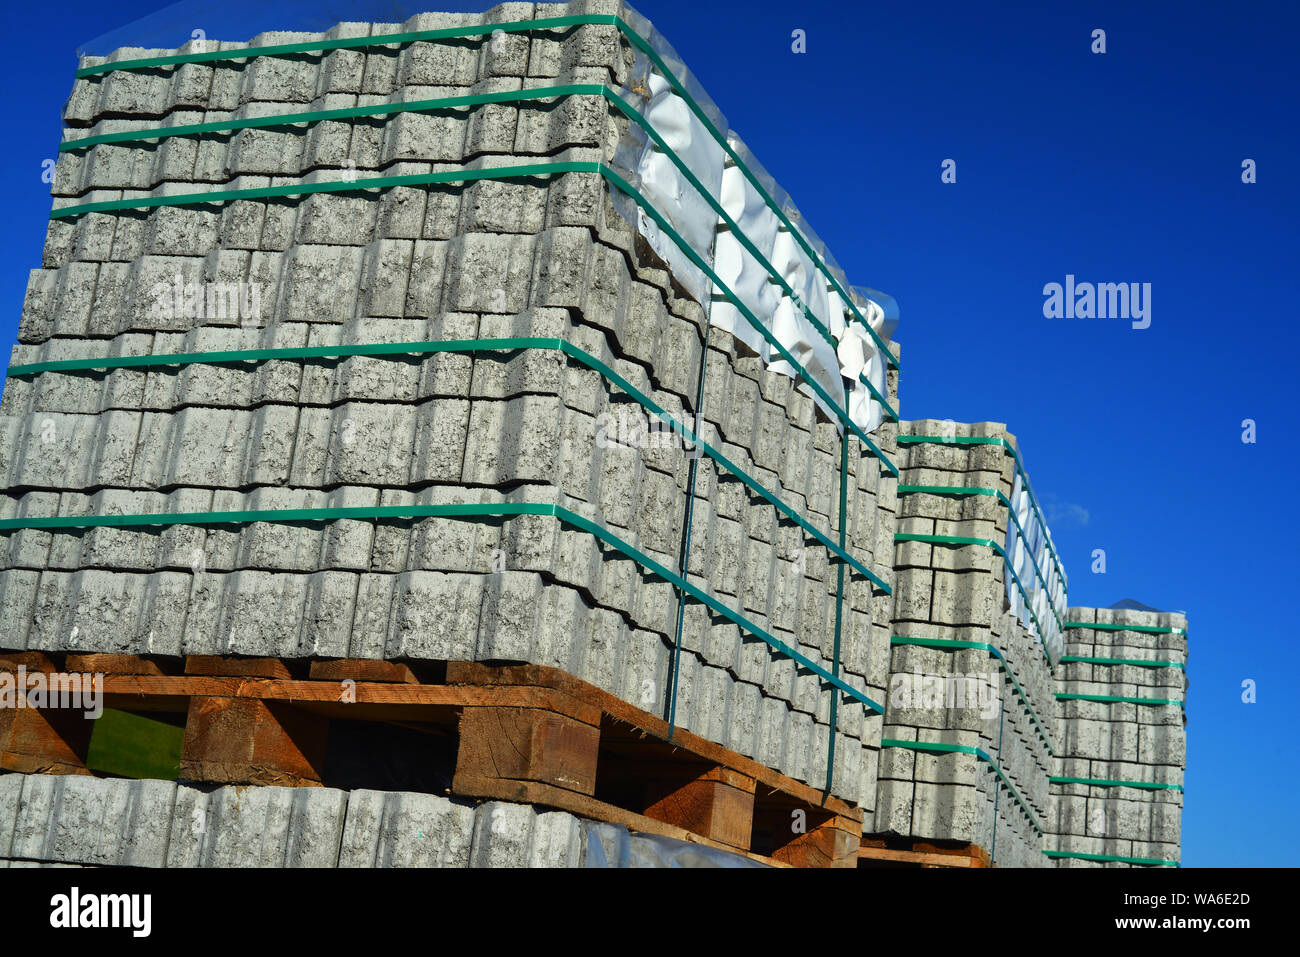 new cobblestons on pallet waiting for workers Stock Photo